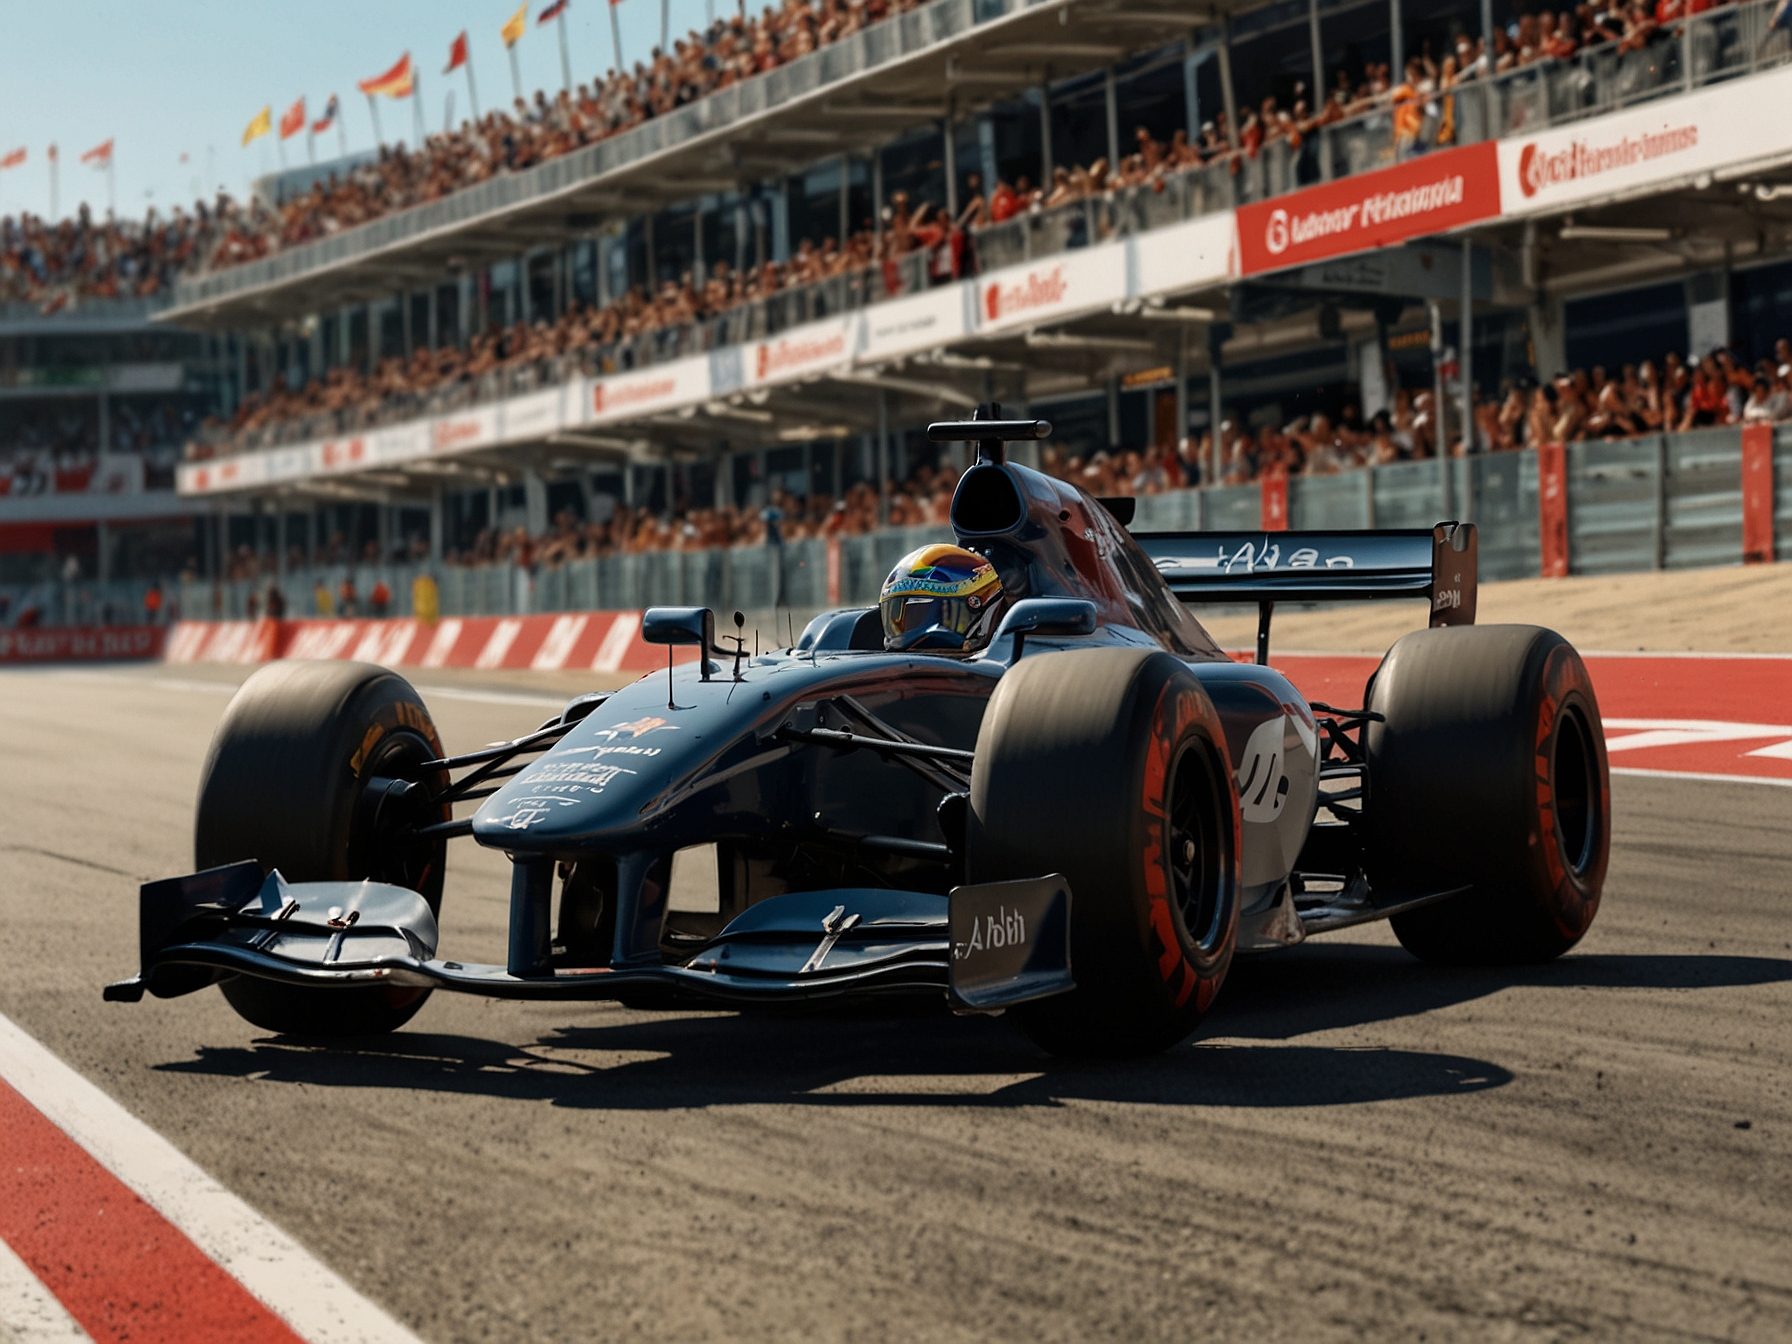 Abbi Pulling crosses the finish line at the Circuit de Barcelona-Catalunya, leading the inaugural F1 Academy race by a significant margin and showcasing her outstanding driving skills.